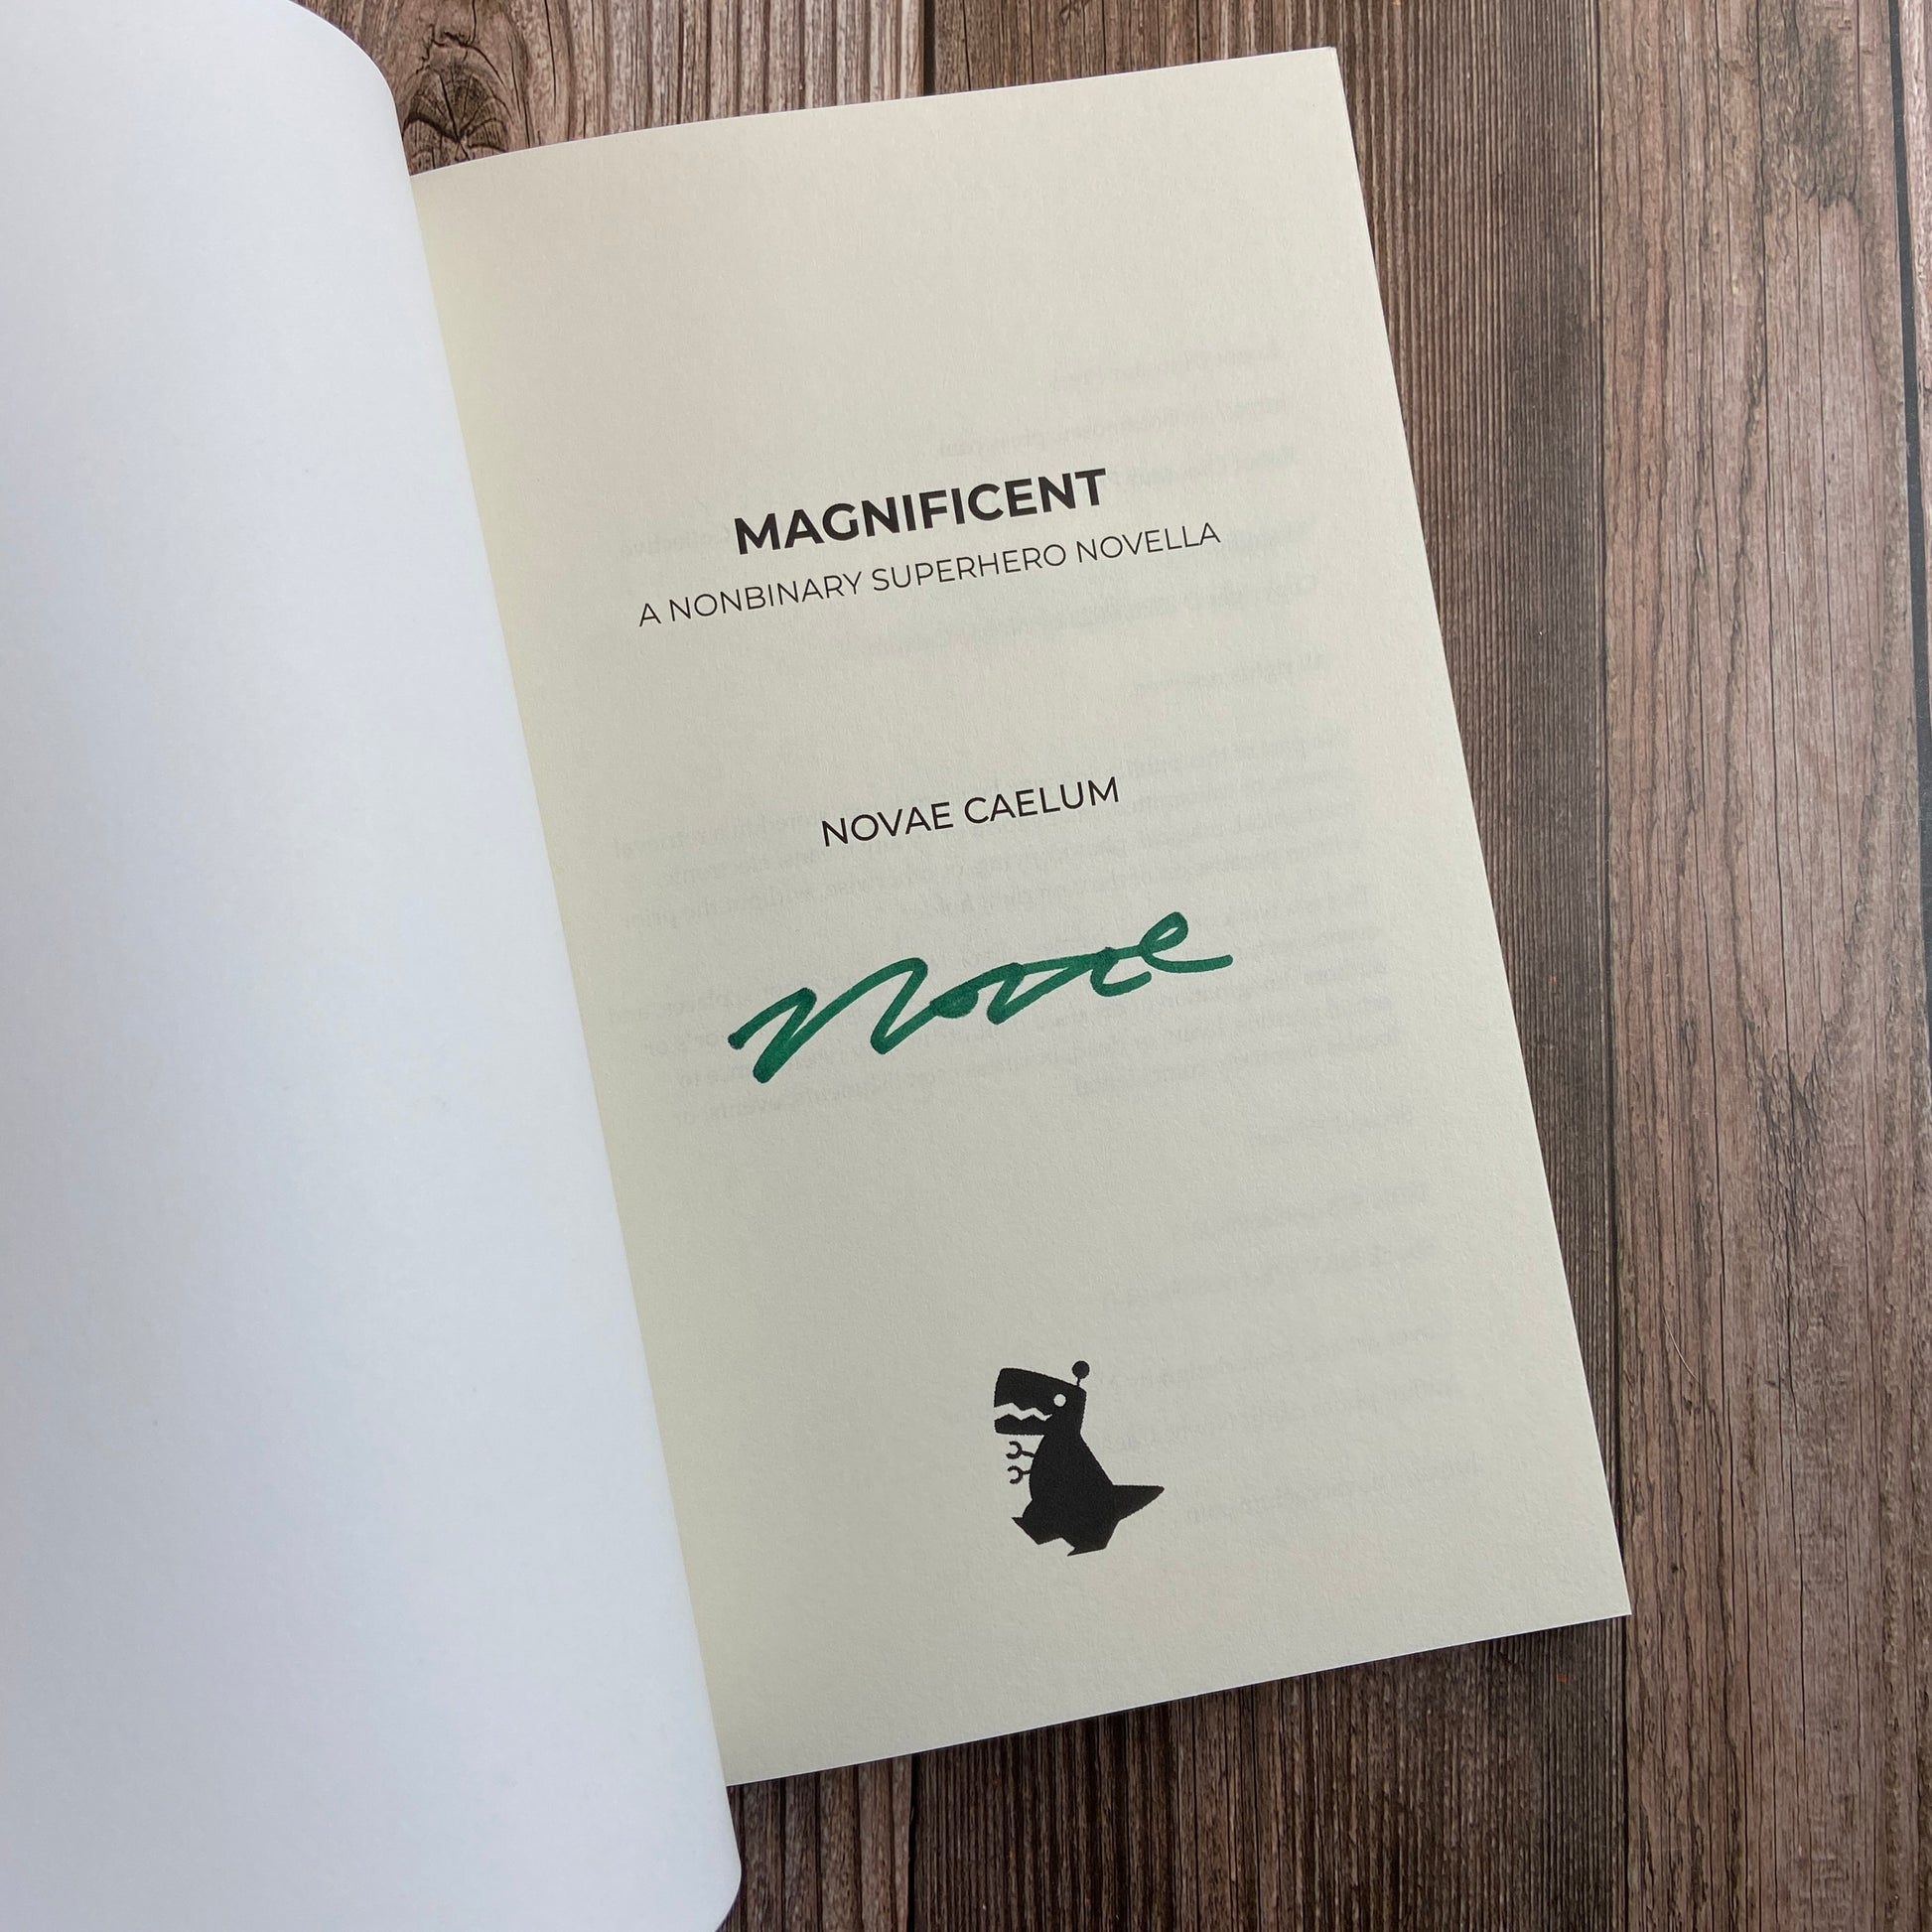 A SIGNED Magnificent: A Nonbinary Superhero Novella (Paperback) by Novae Caelum rests on a wooden table.